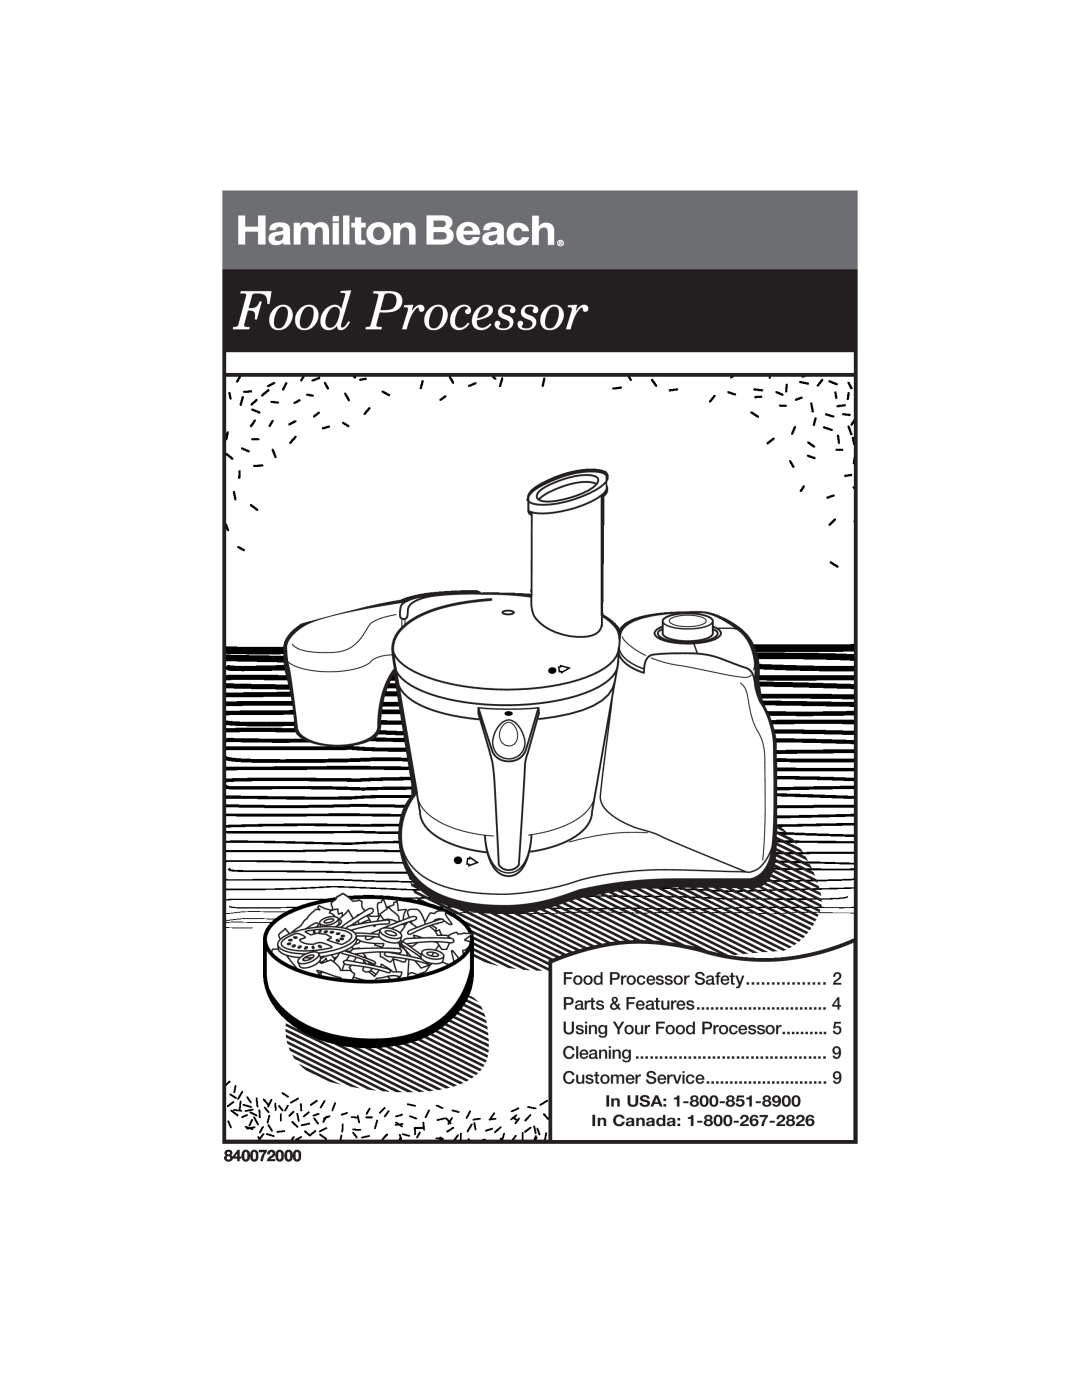 Hamilton Beach 840072000 manual Food Processor, Parts & Features, Cleaning, Customer Service, In USA, In Canada 